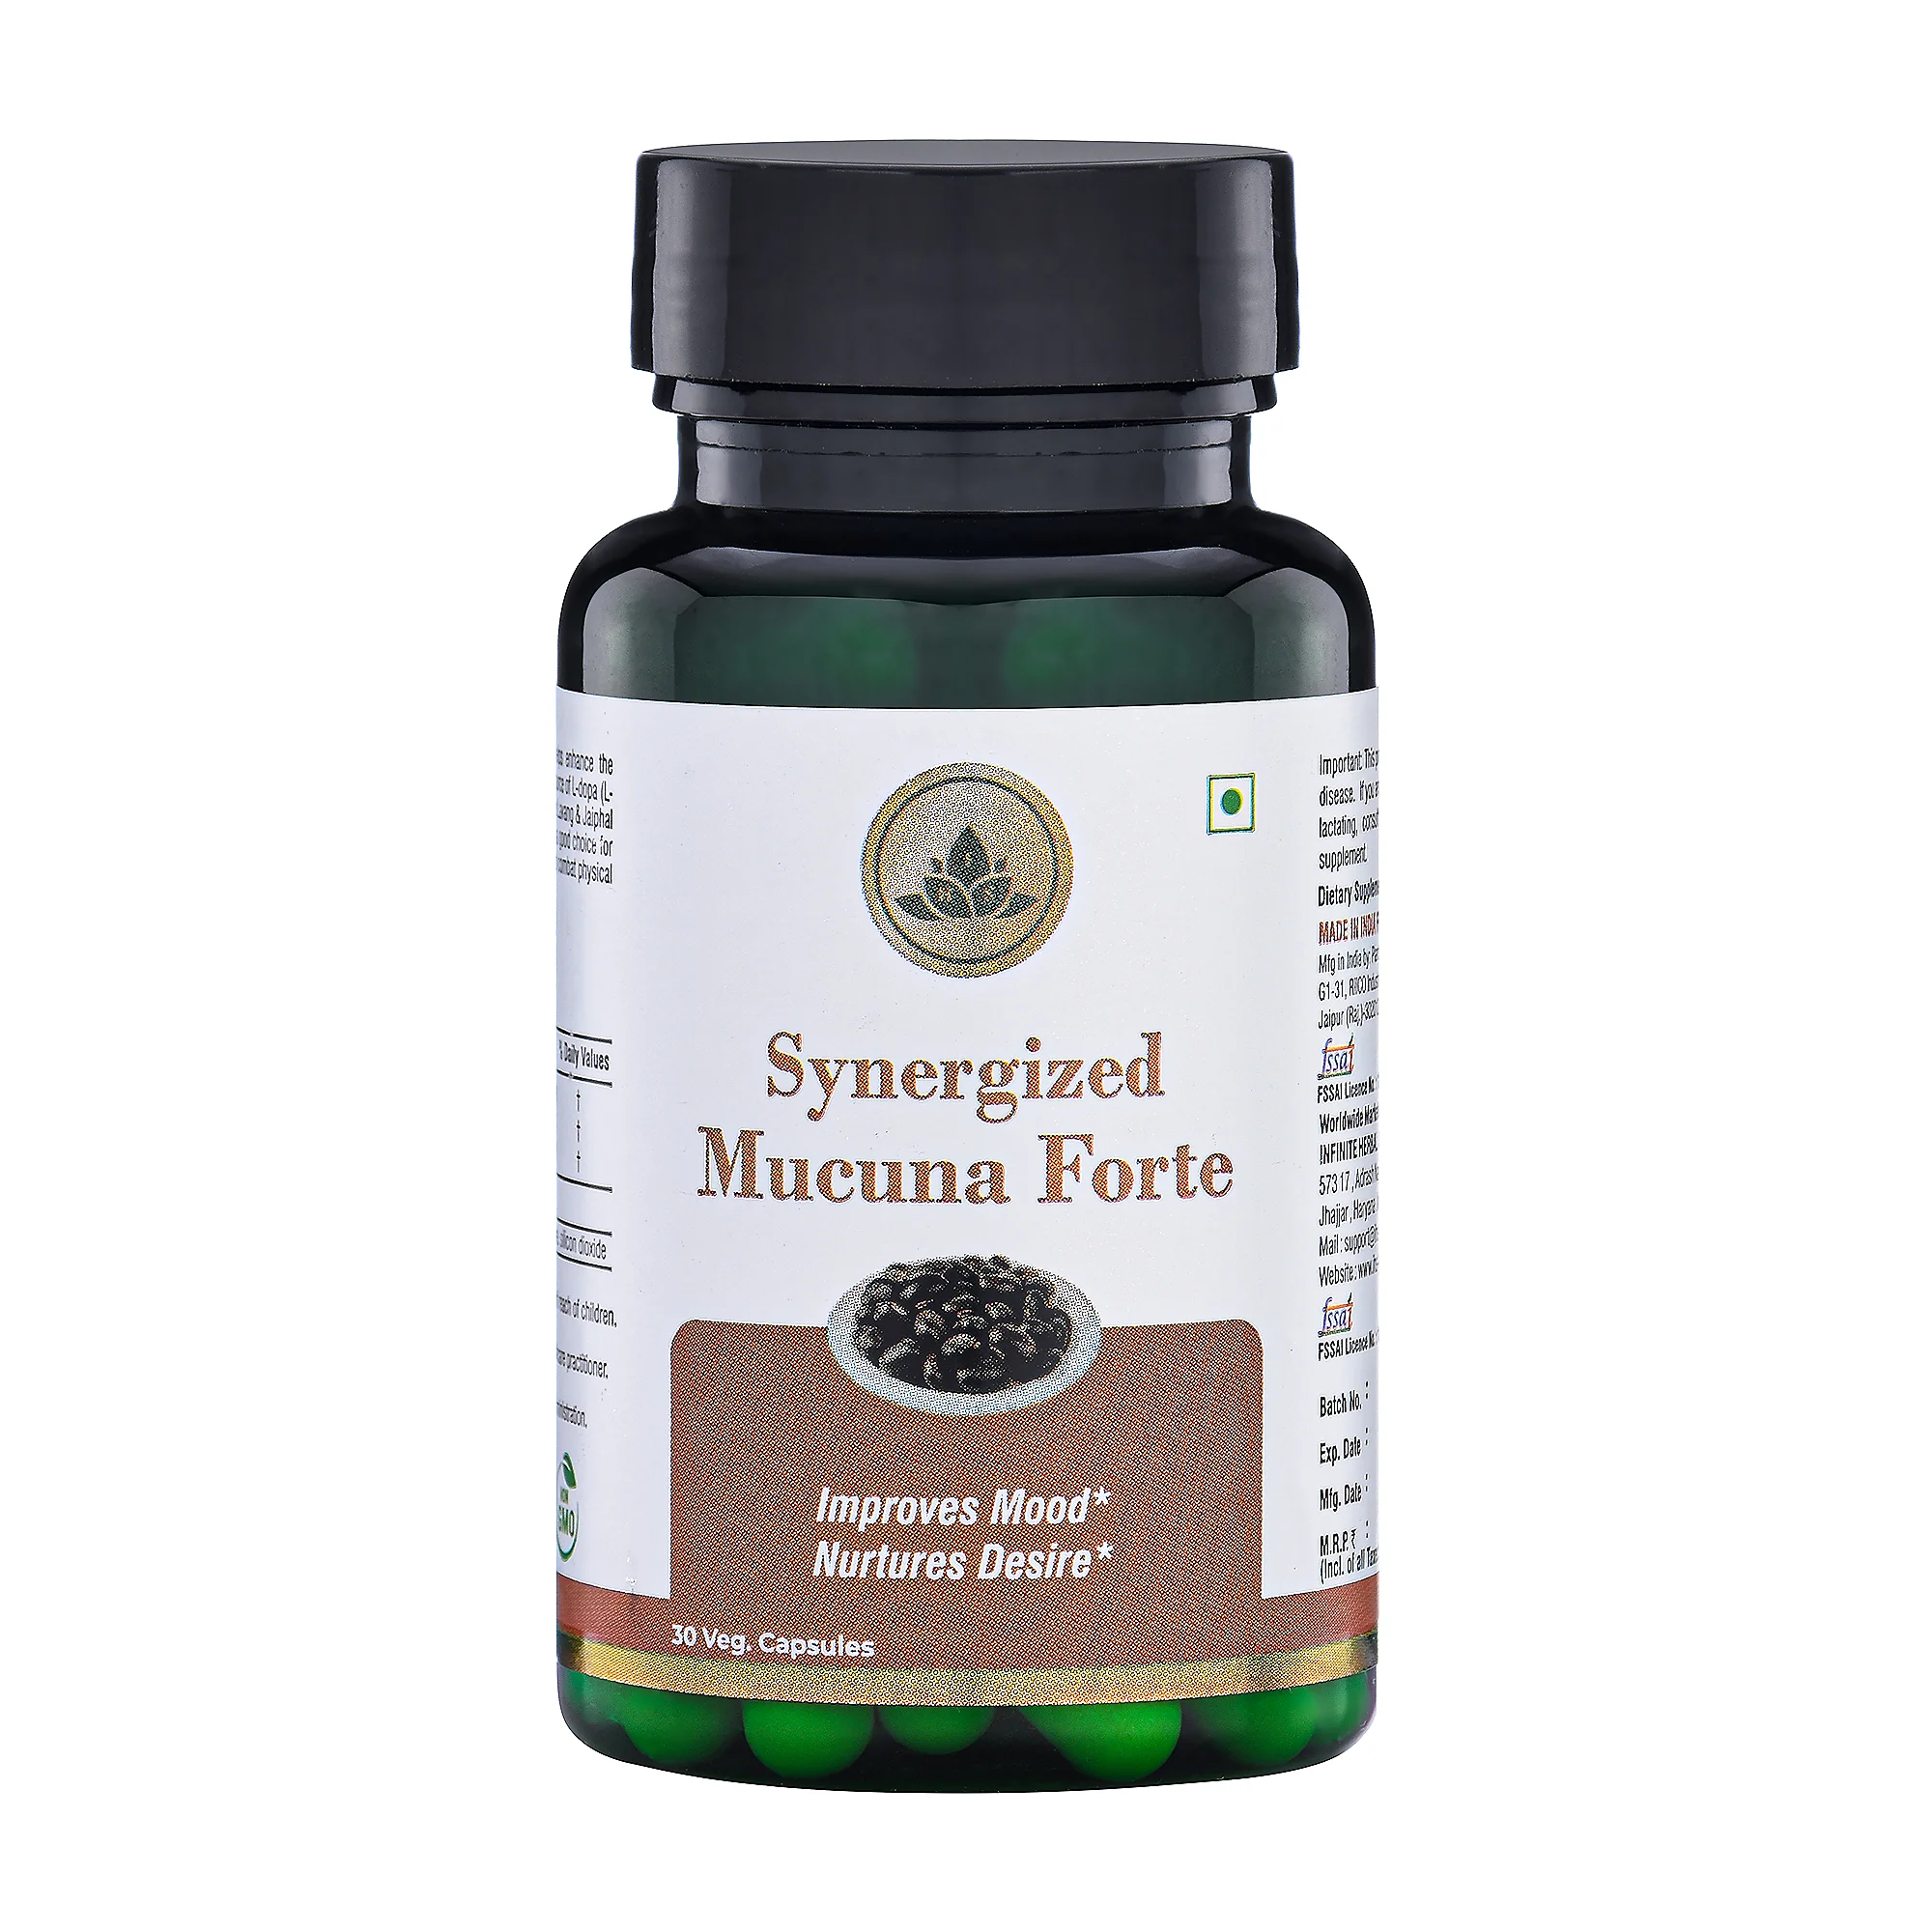 Synergized Mucuna Forte Herbs For Stamina And Energy